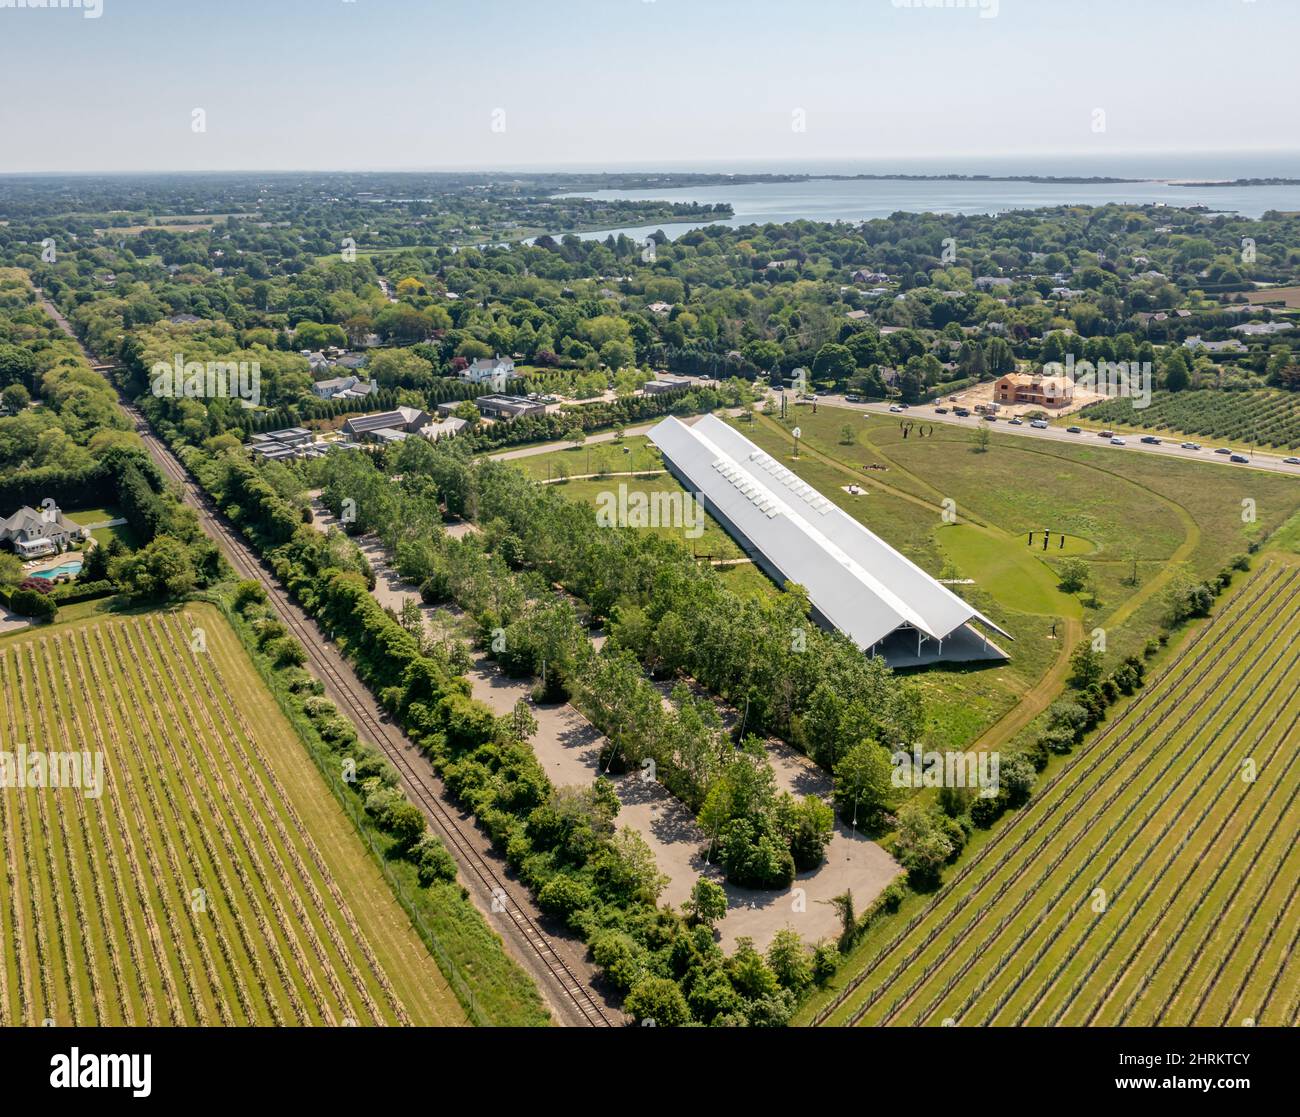 Aerial view of the Parrish Museum and surrounding area Stock Photo